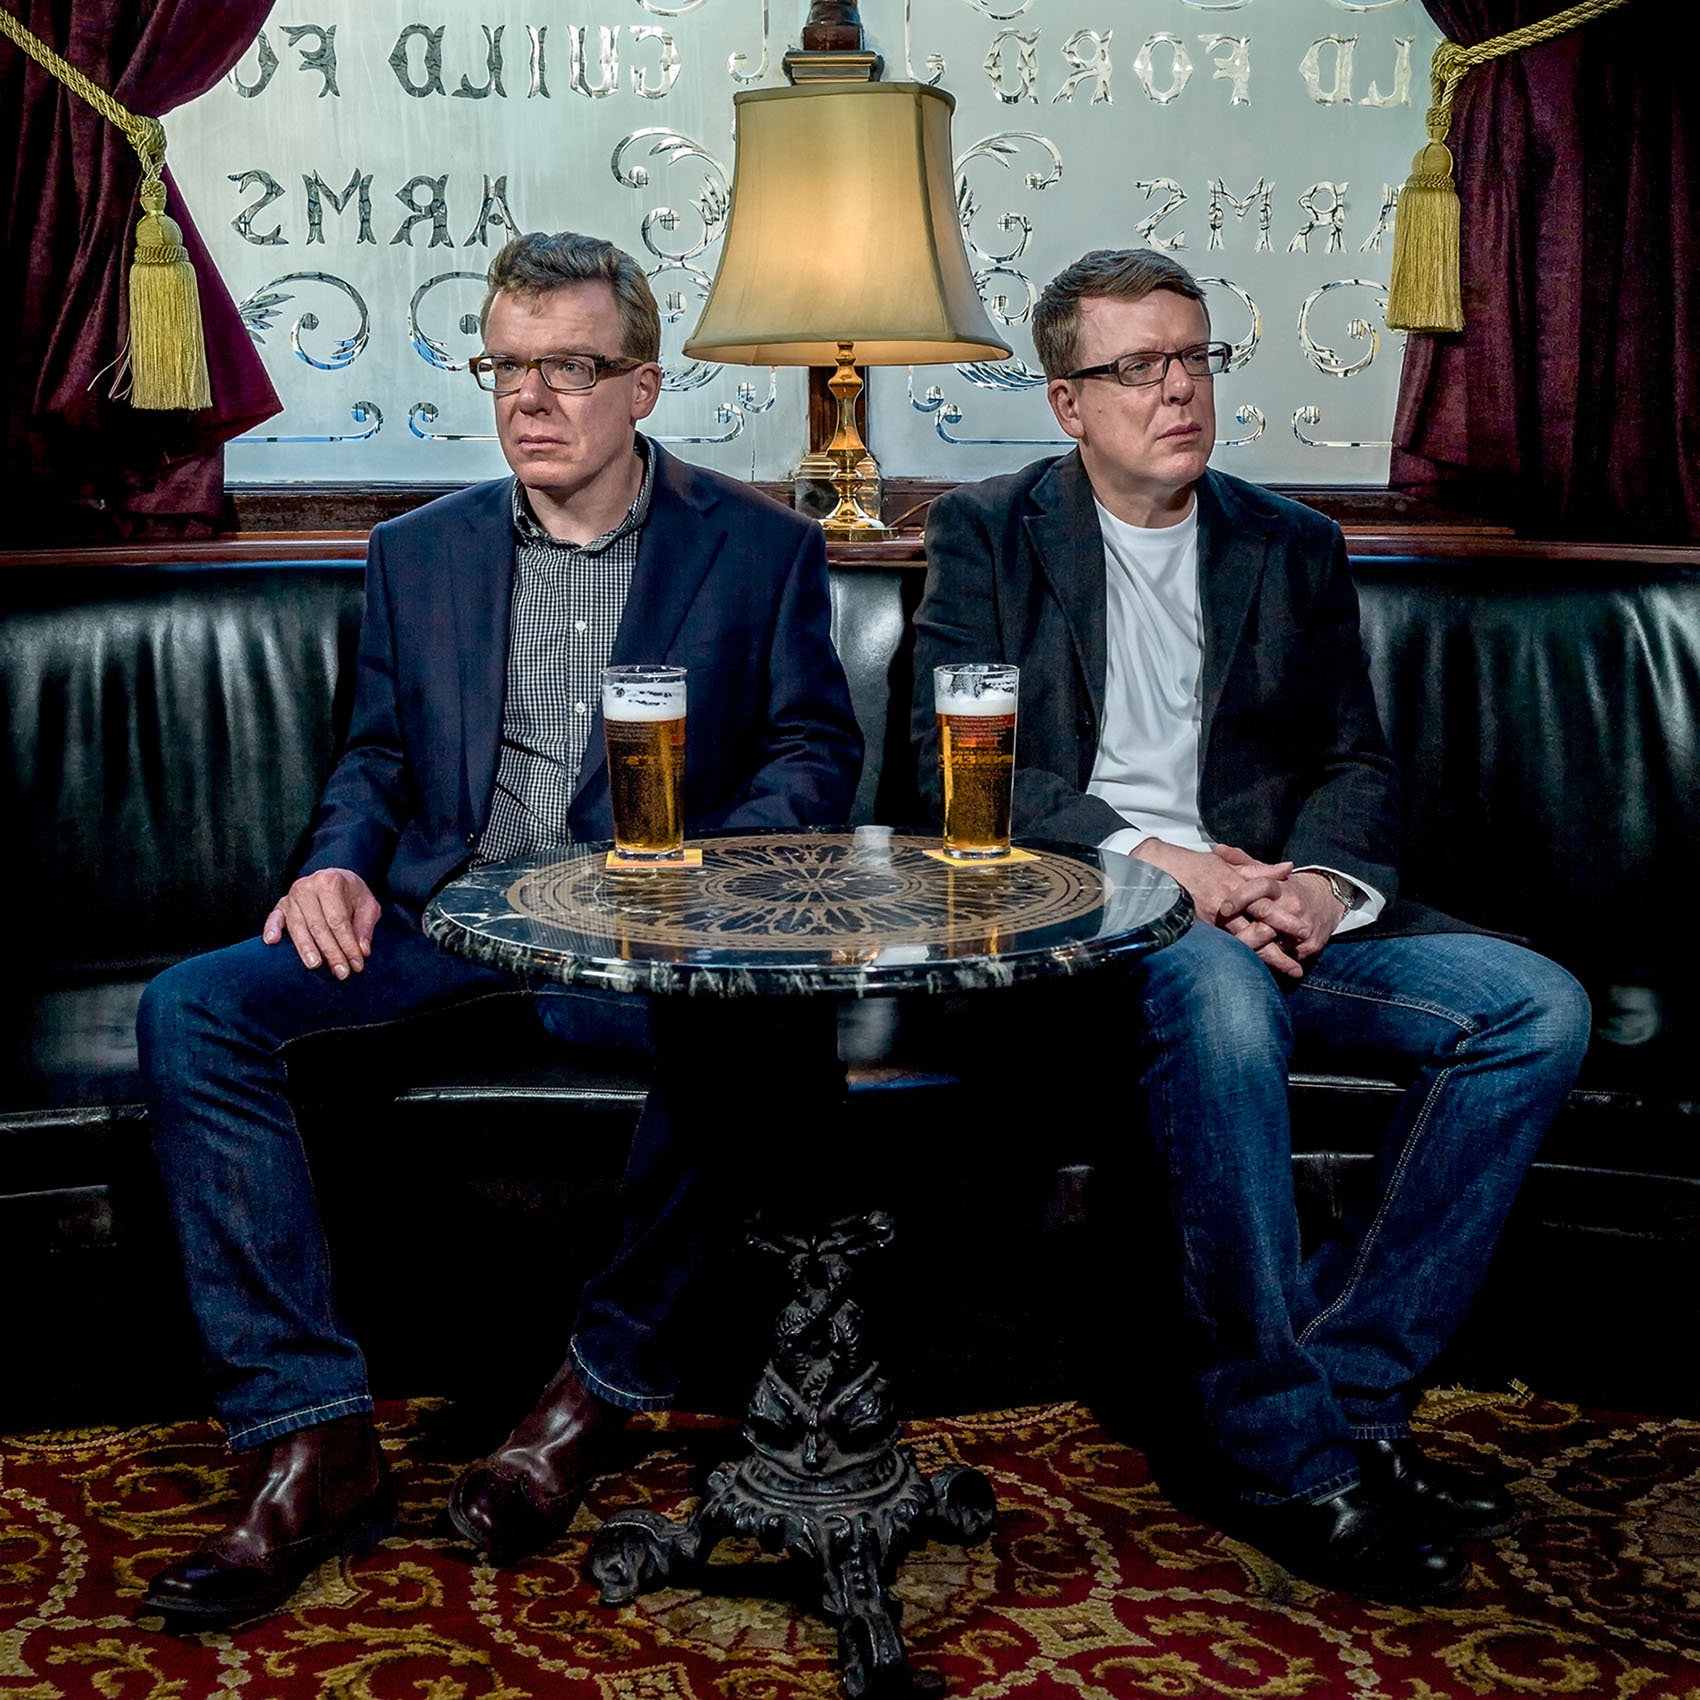 The Proclaimers - musicians